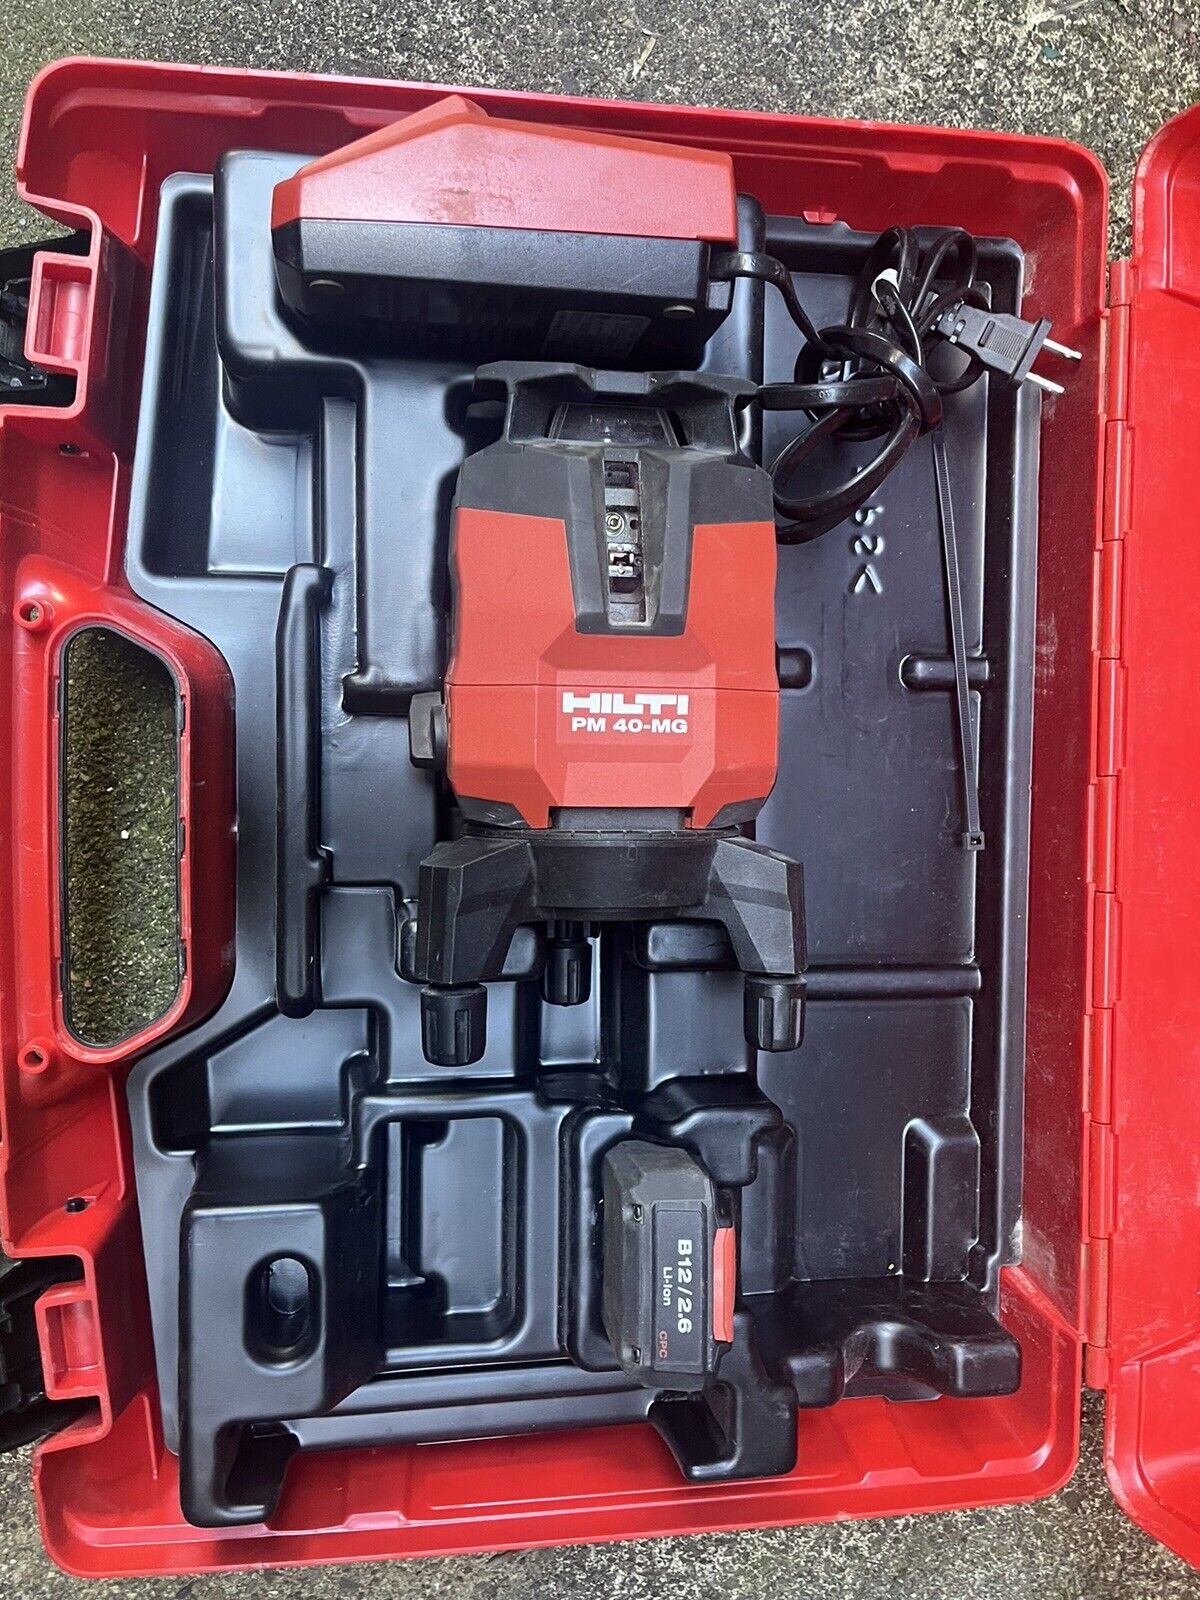 HILTI PM 40-MG Laser Level With HILTI B12/2.6 Battery, Charger, In Case-TESTED